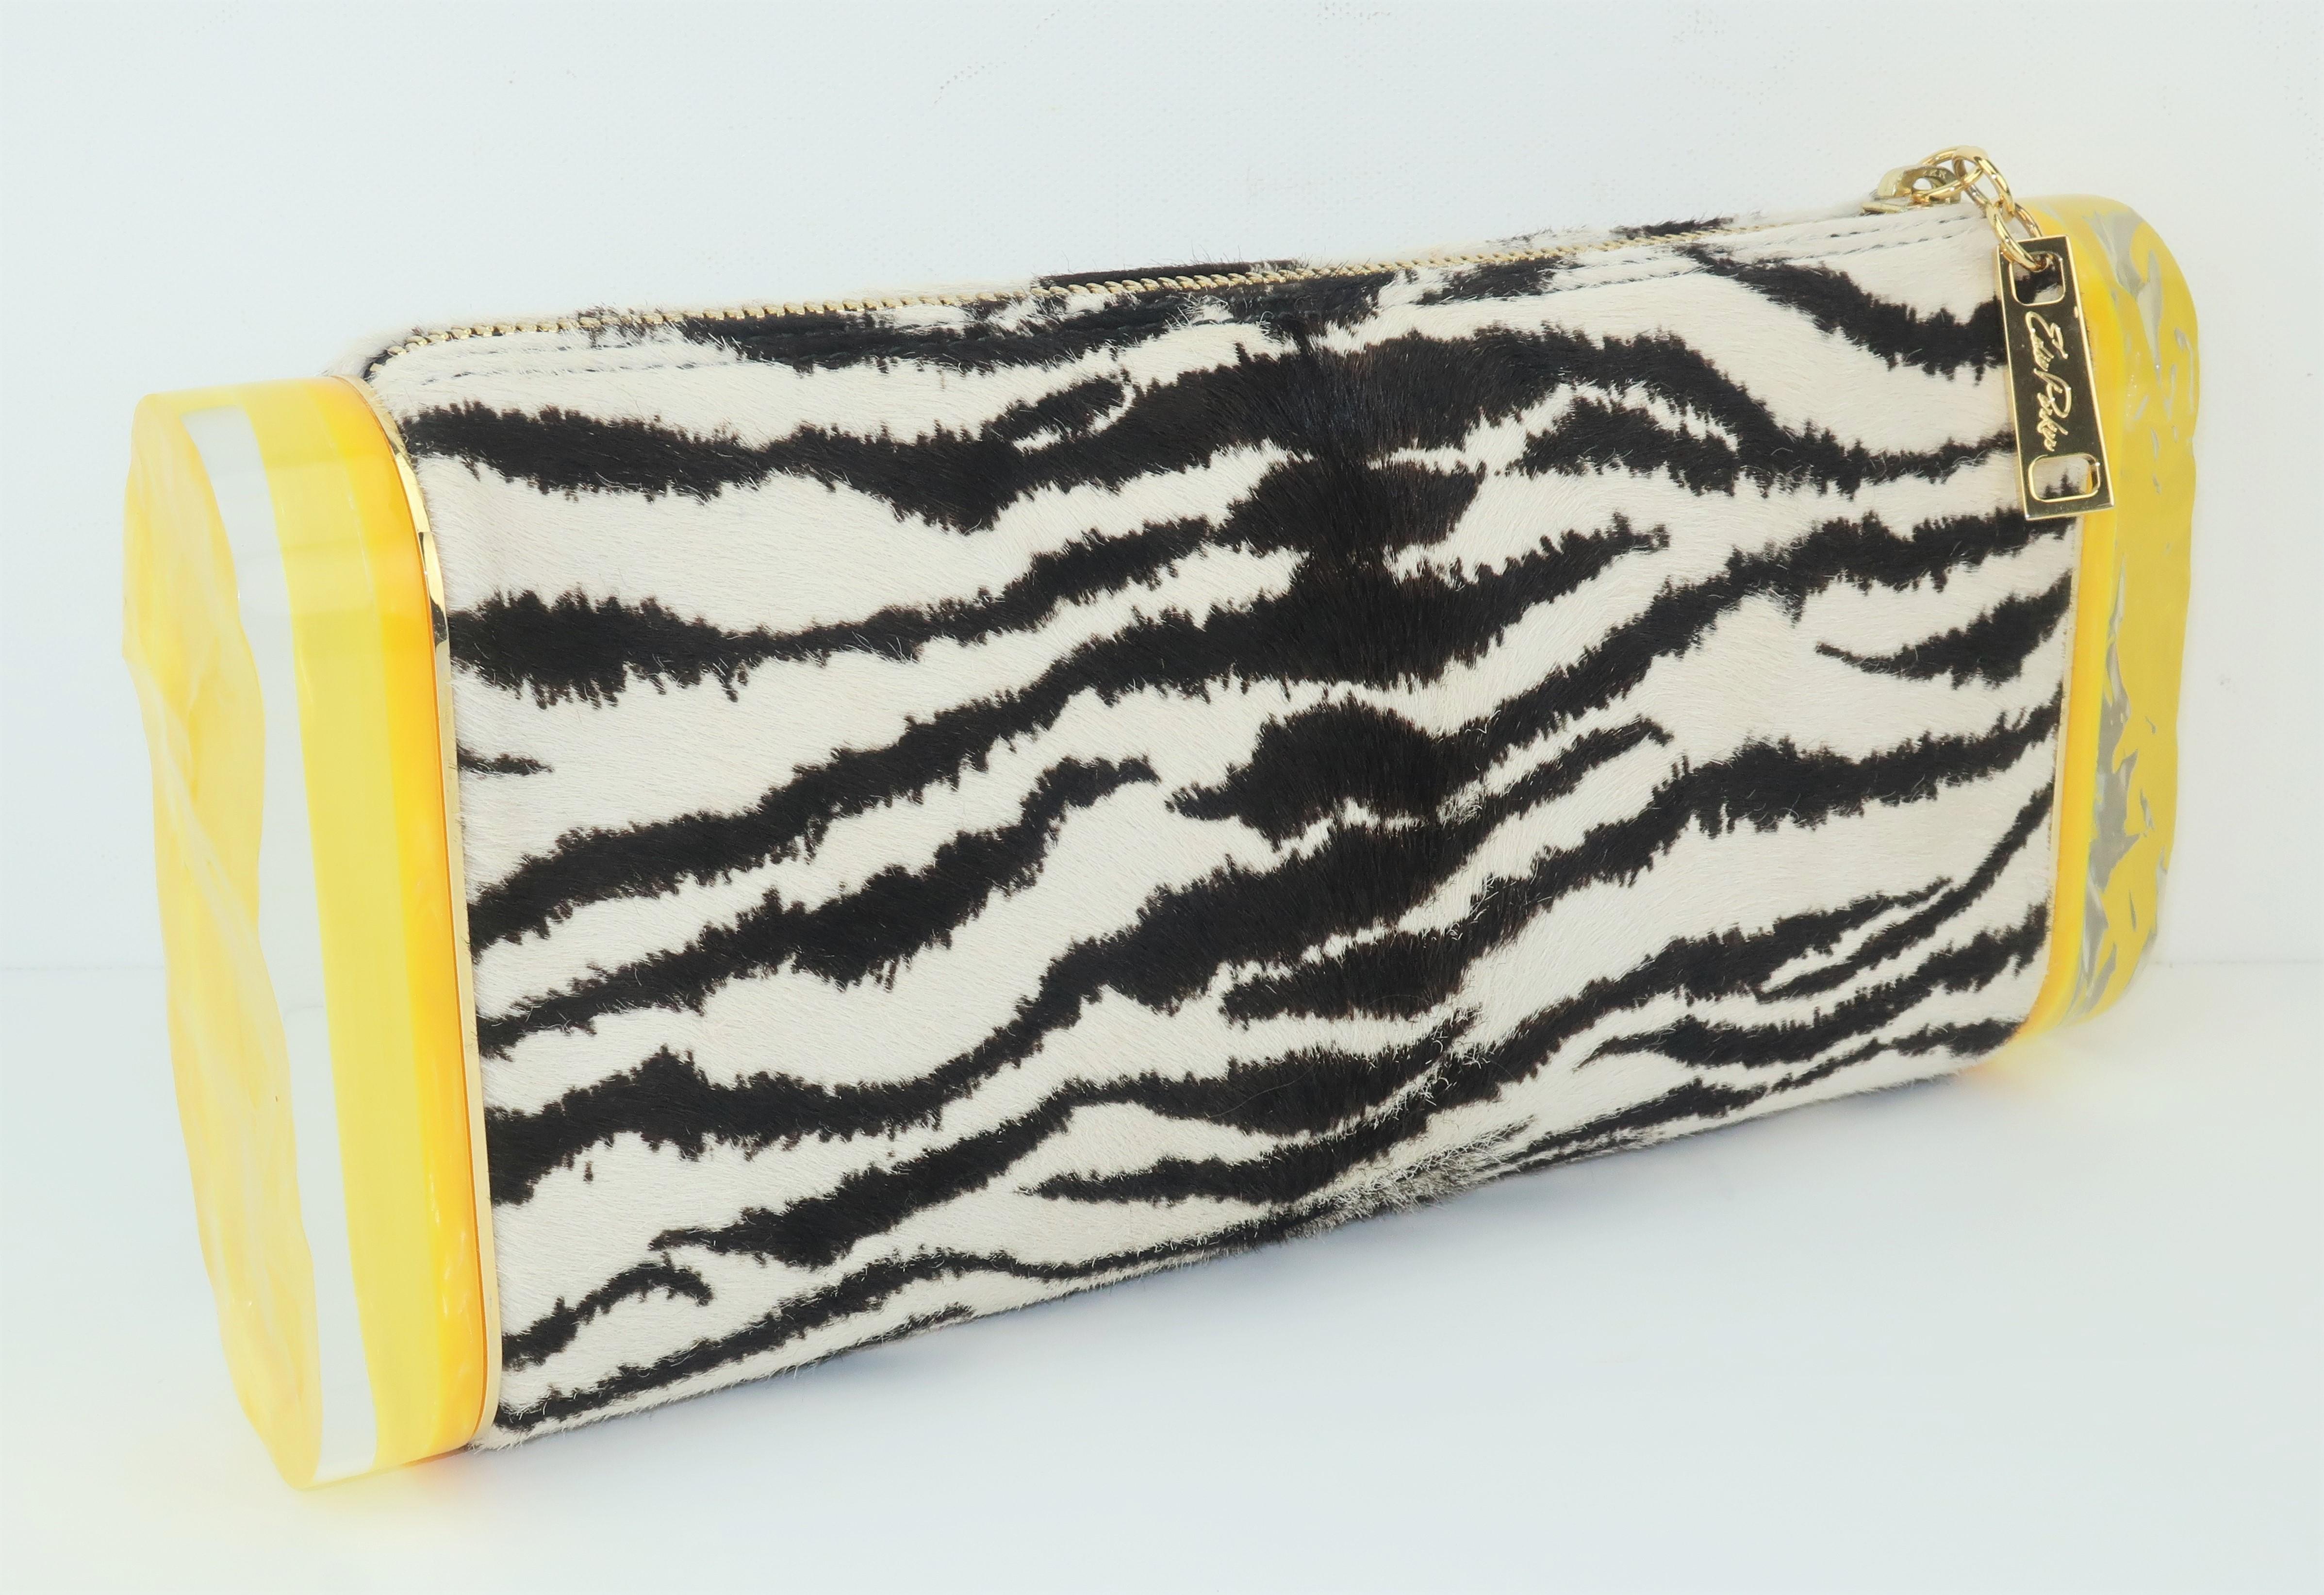 Edie Parker's designs by Brett Heyman are inspired by mid century fashions and each handbag is a unique and whimsical treasure.  This clever clutch is called the 'Lara' and features a zebra printed calf hair body accented by chunky acrylic pieces on